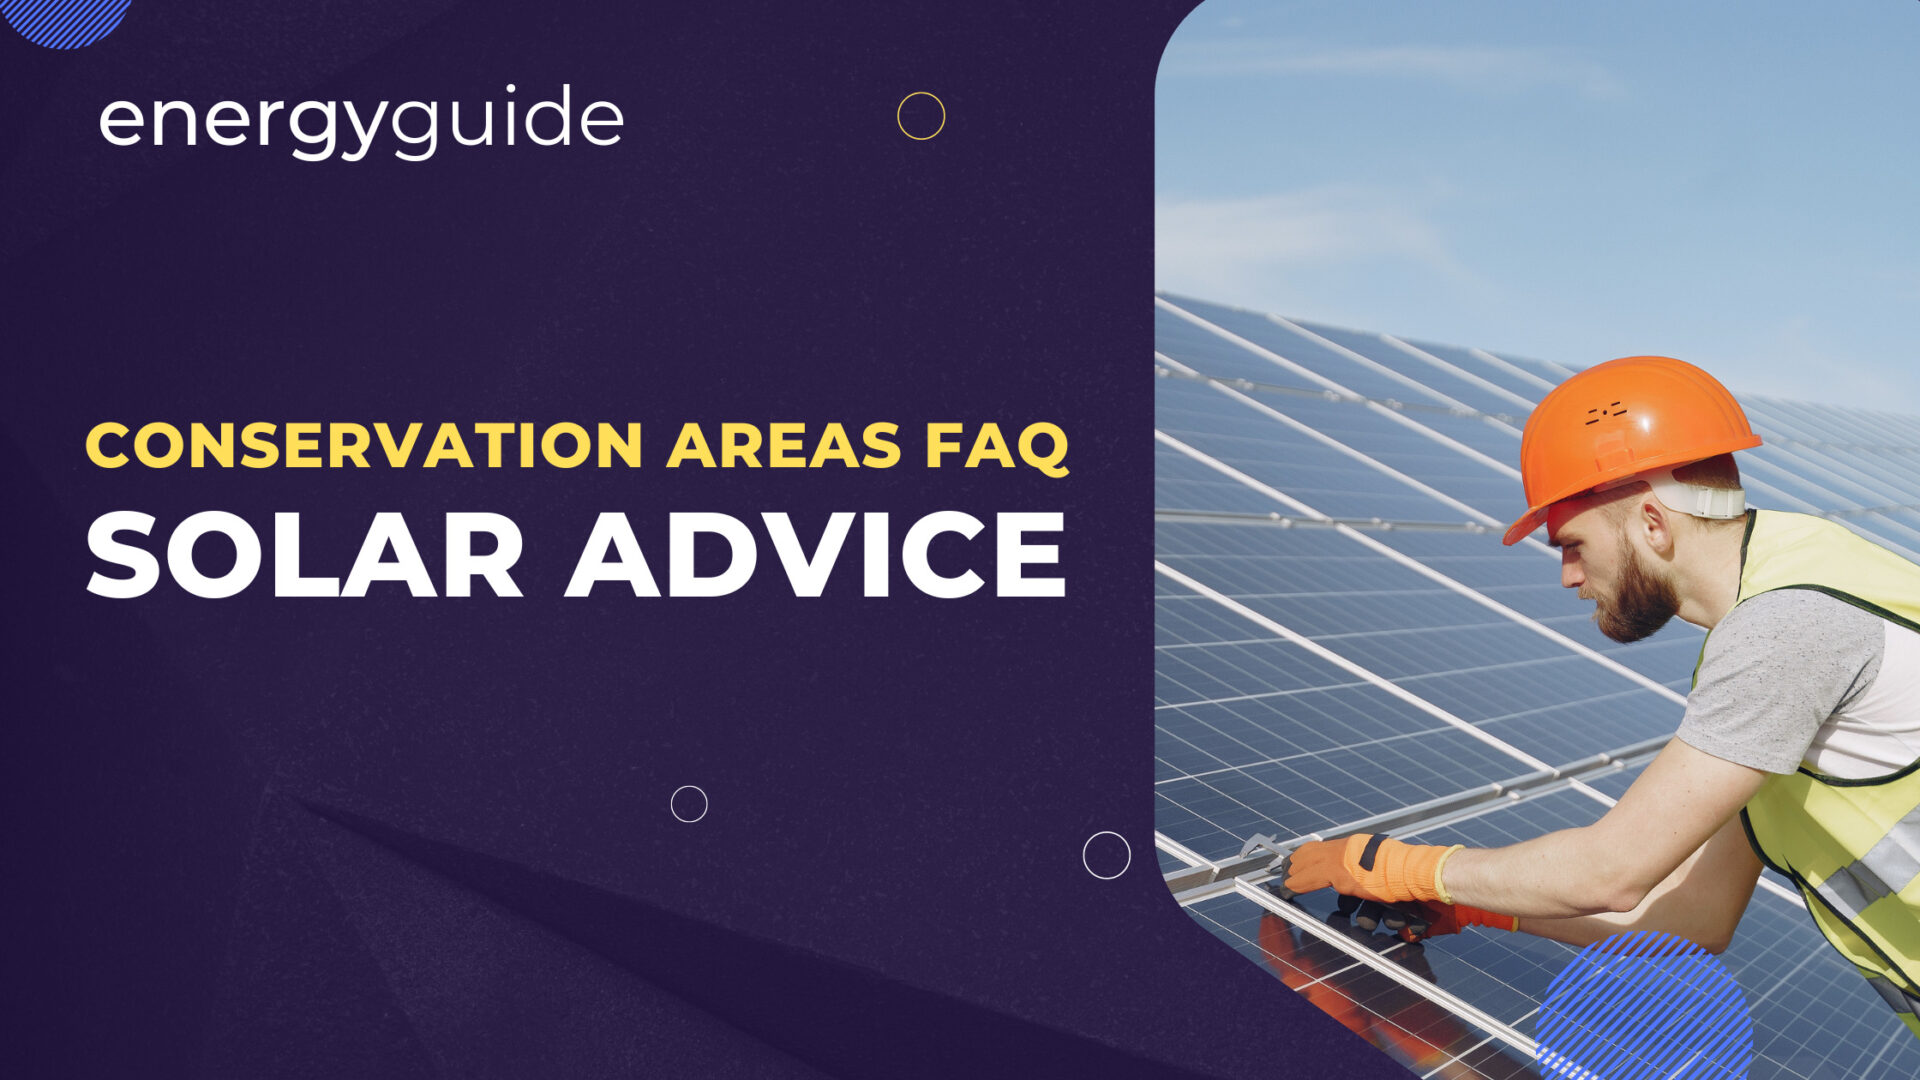 Can You Install Solar in a Conservation Area